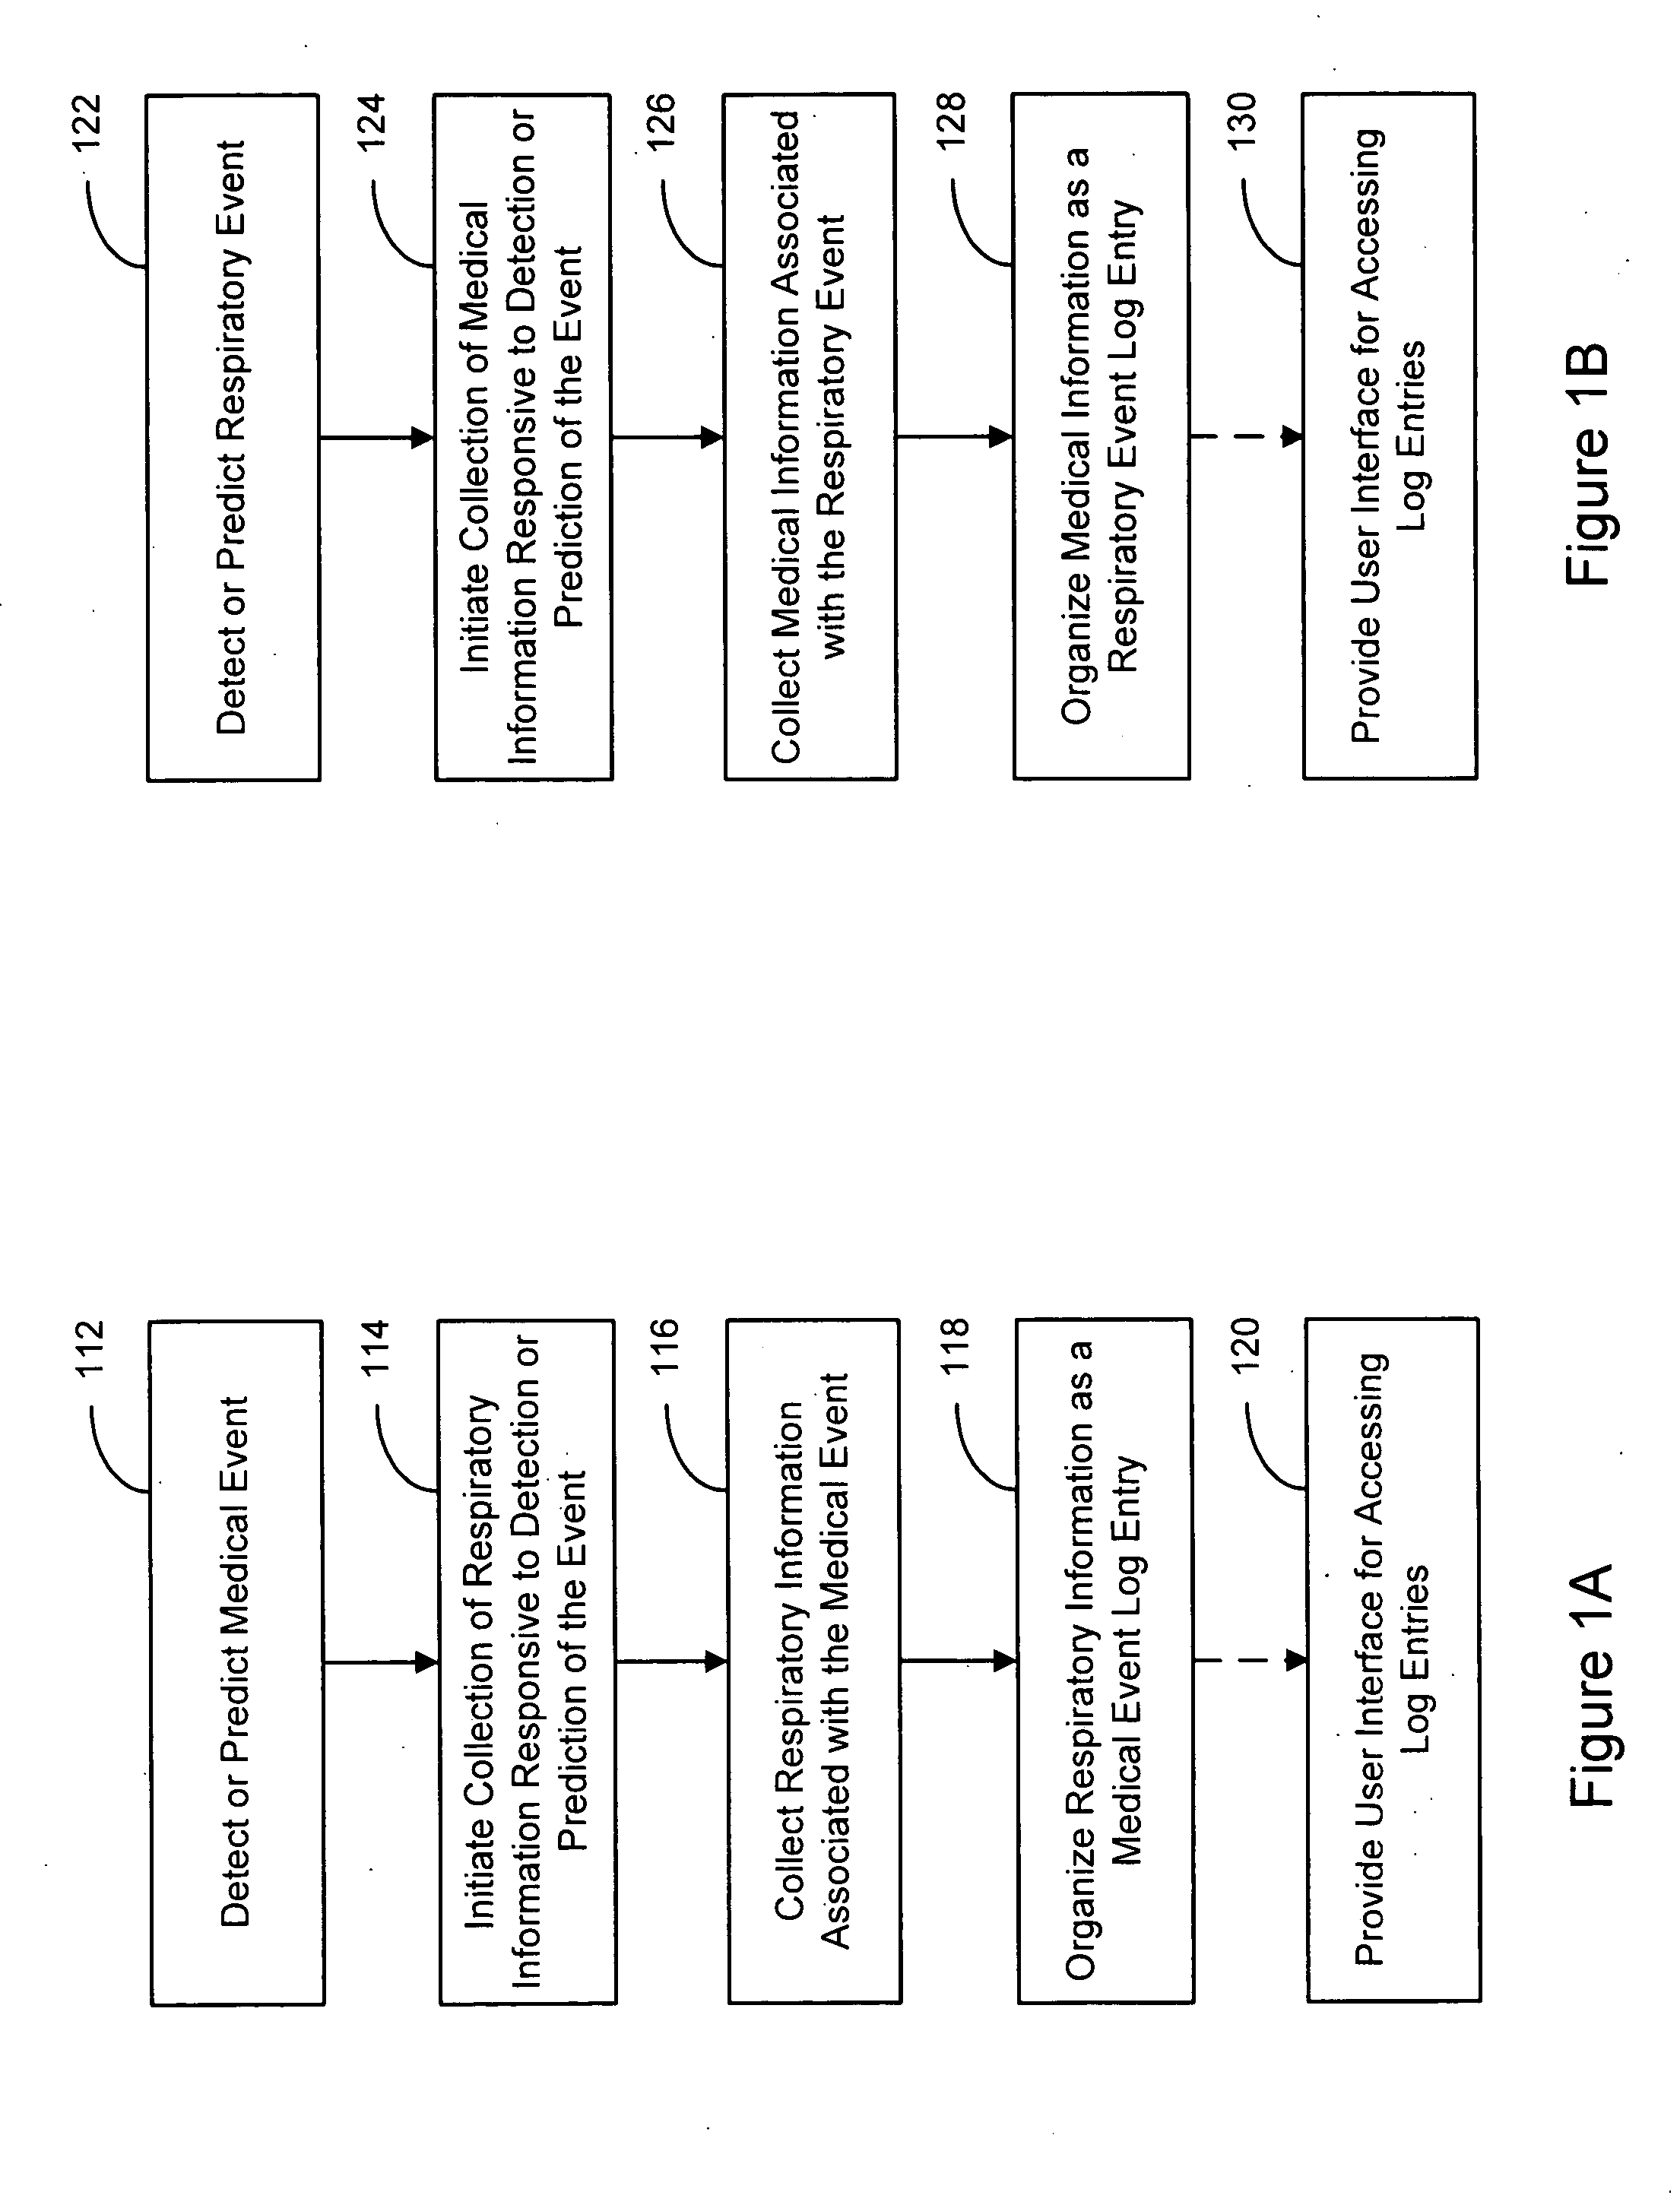 Medical event logbook system and method